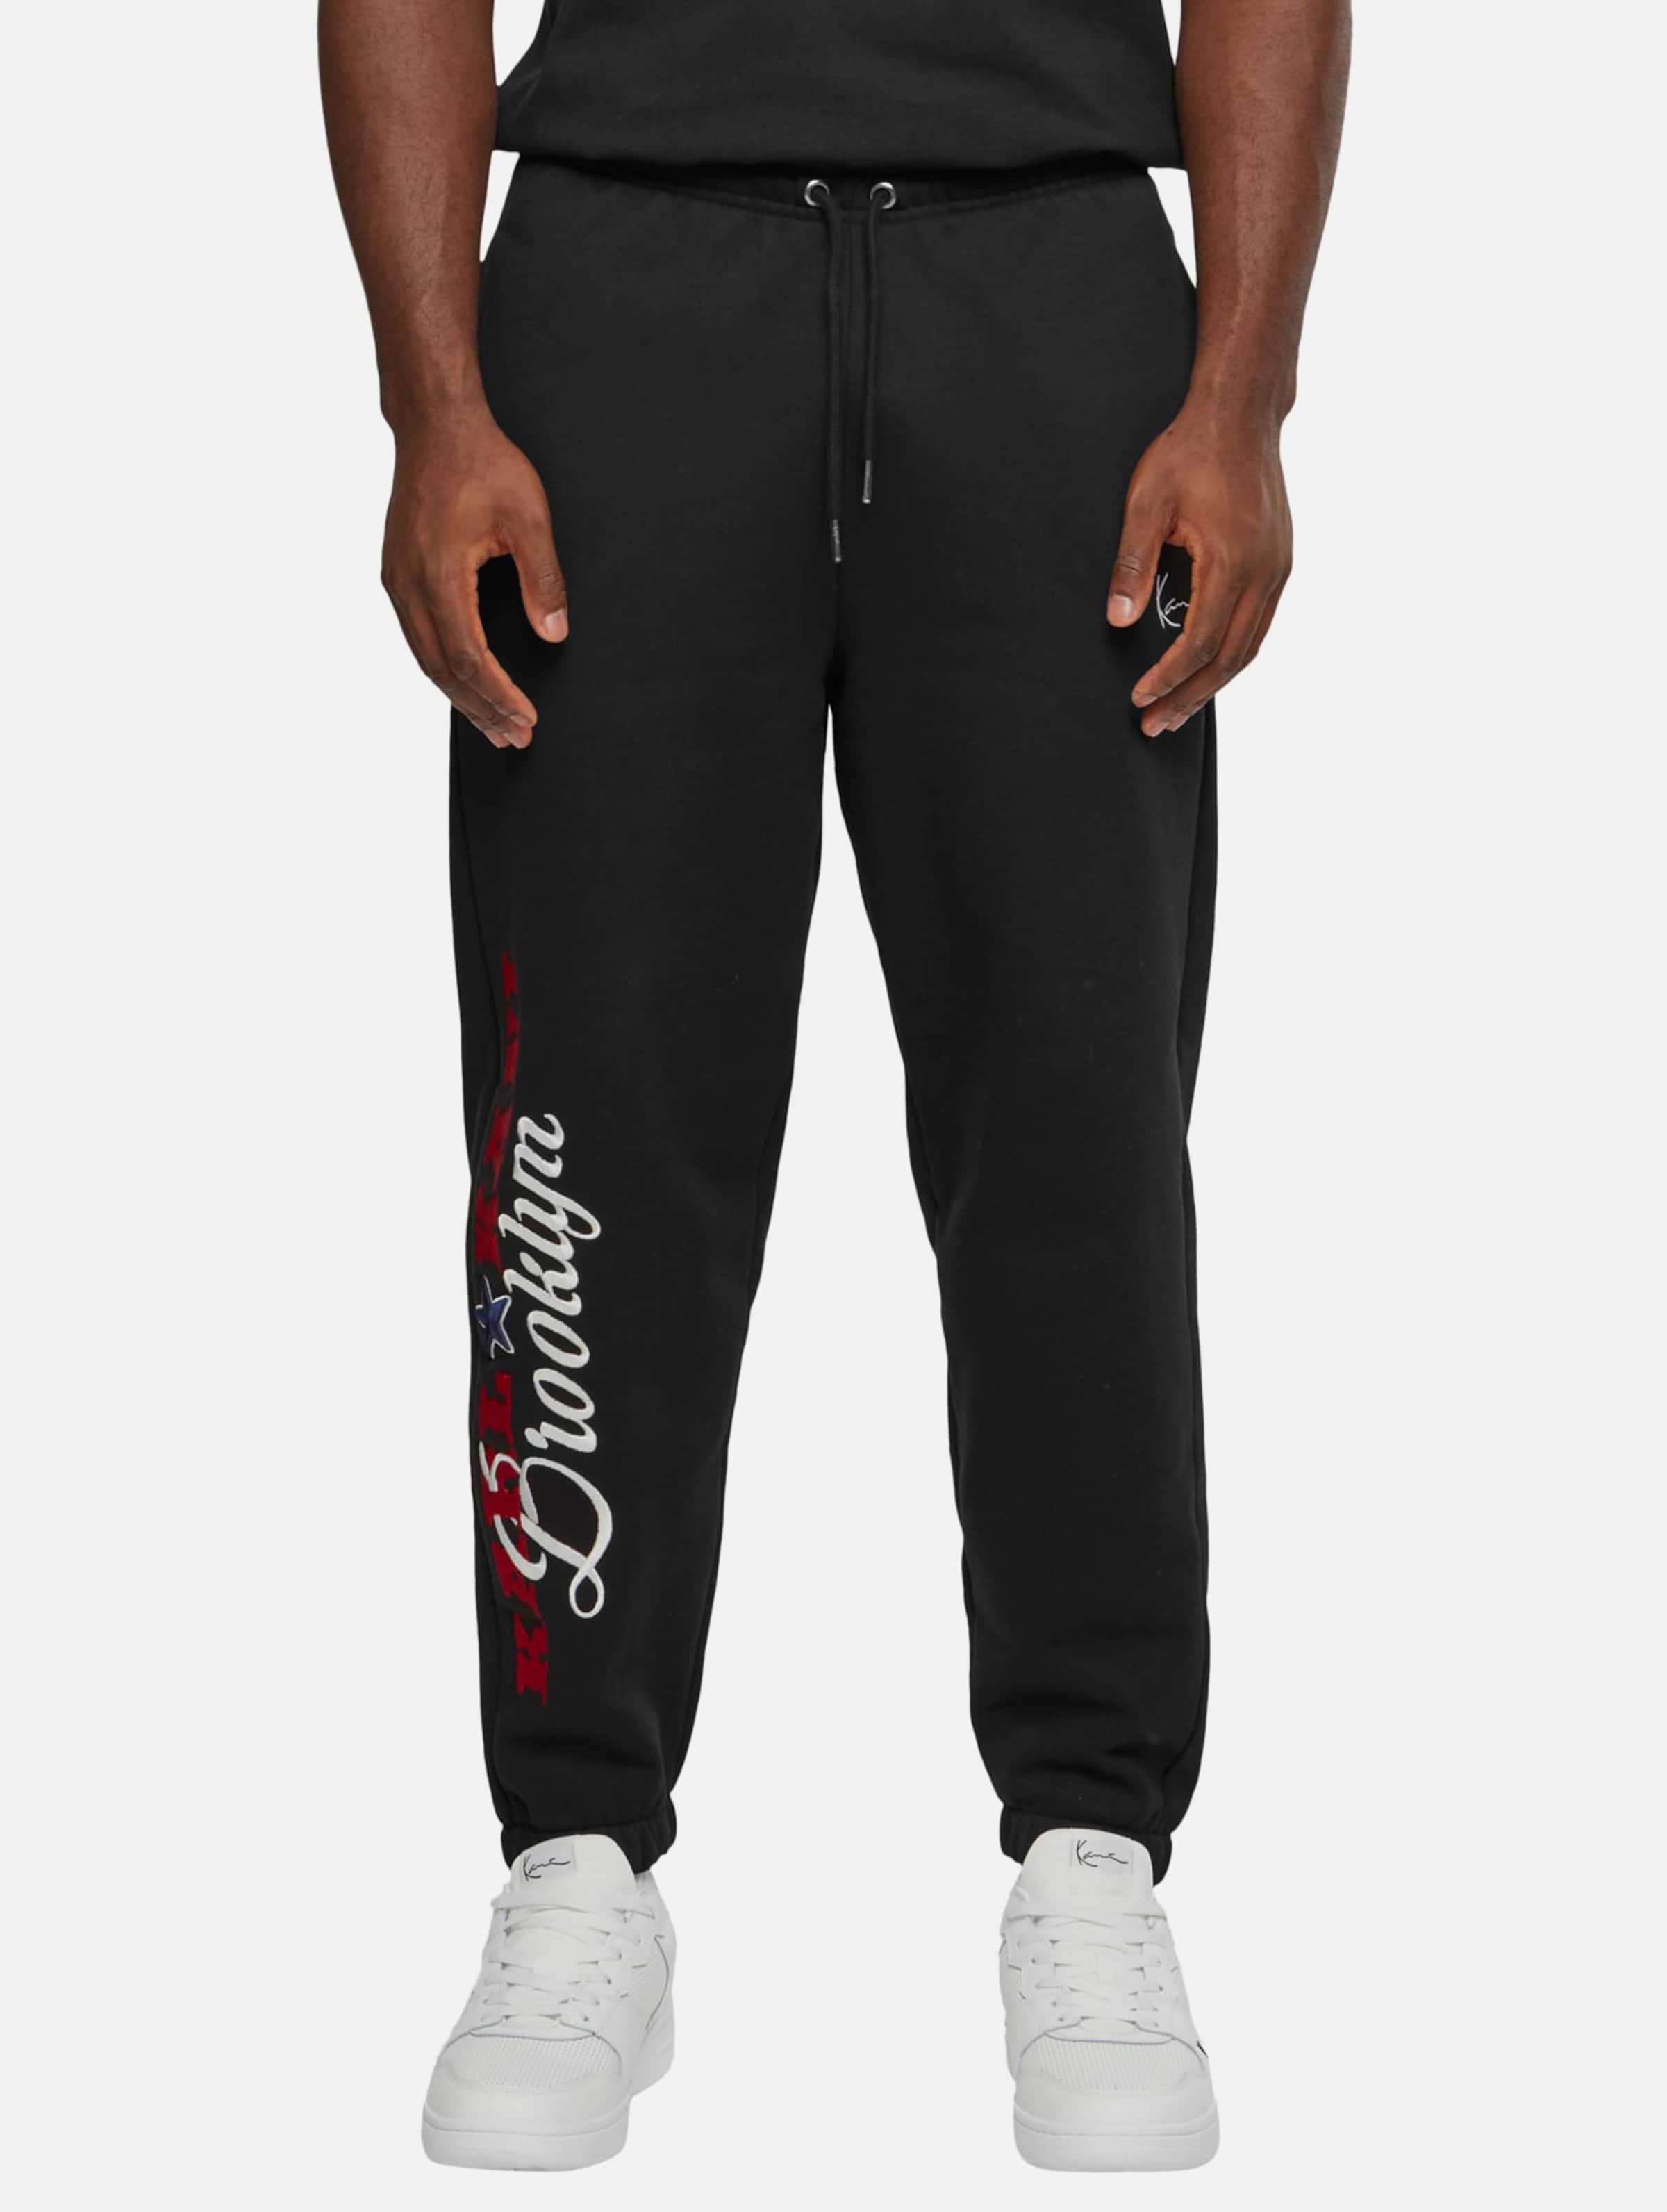 Karl Kani Small Signature Patched Relaxed Fit Cuffed Sweatpants Mannen op kleur zwart, Maat M